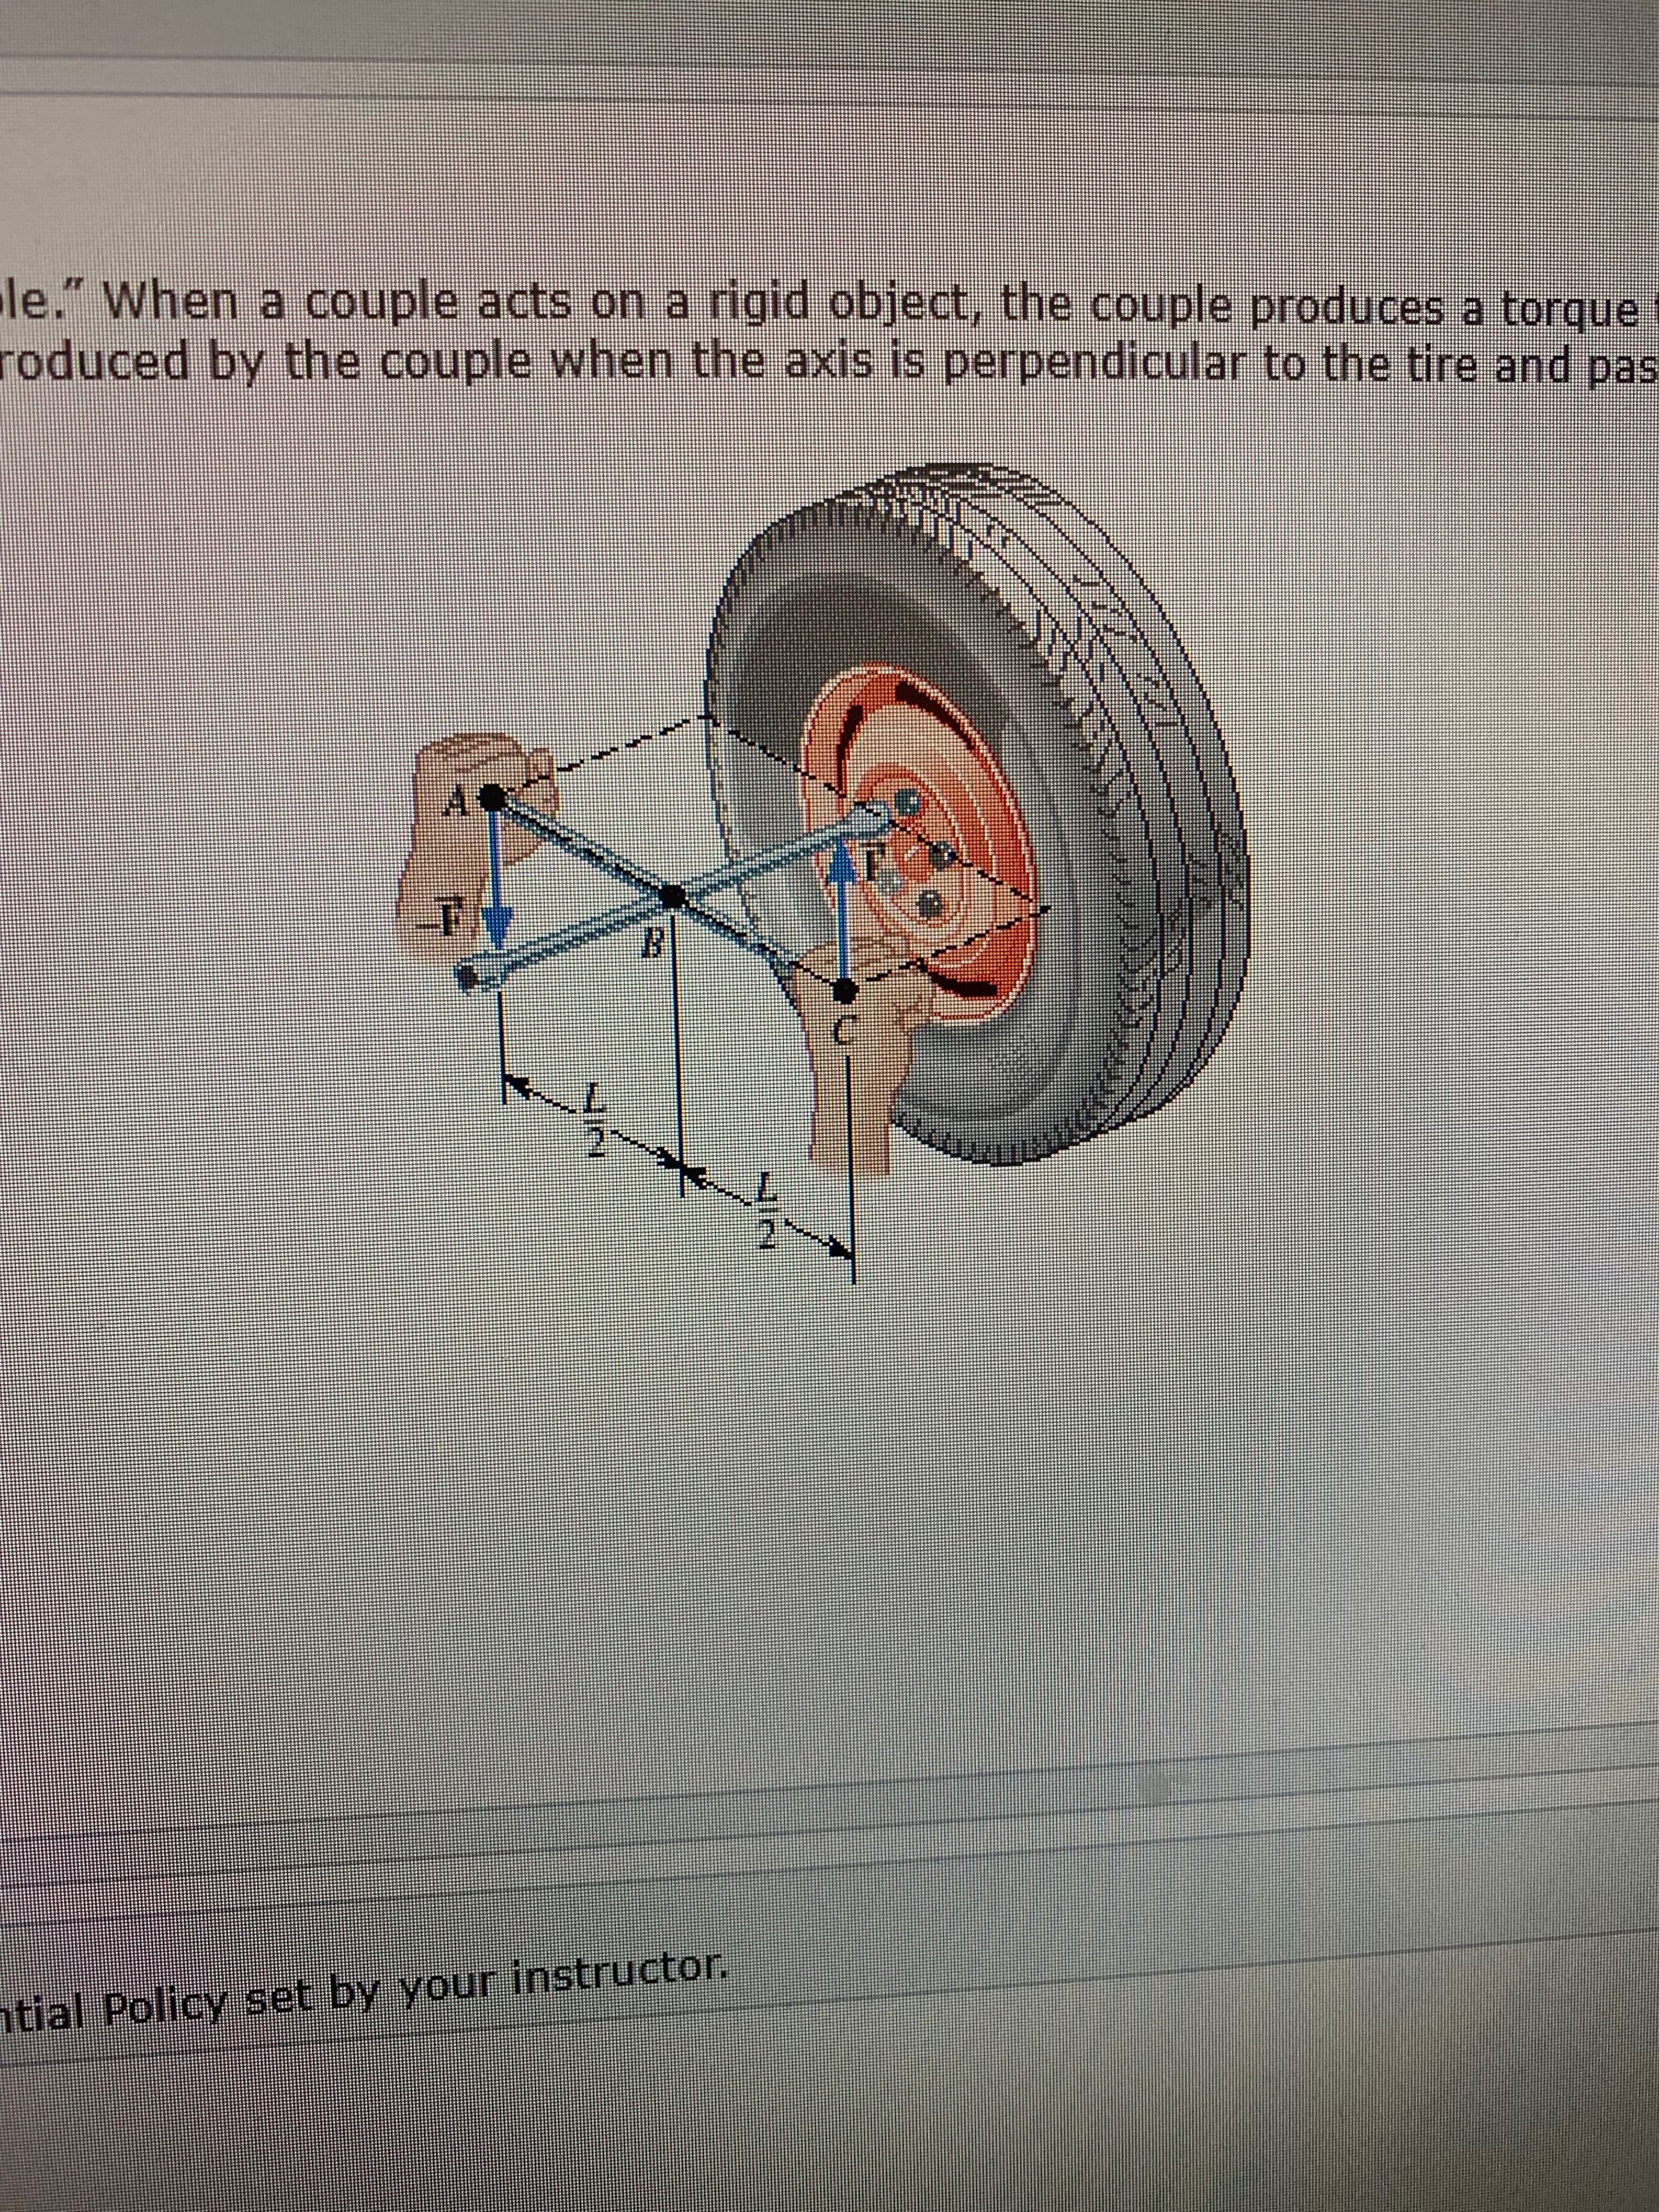 le." When a couple acts on a rigid object, the couple produces a torque
roduced by the couple when the axis is perpendicular to the tire and pas
AC
tial Policy set by your instructor,
